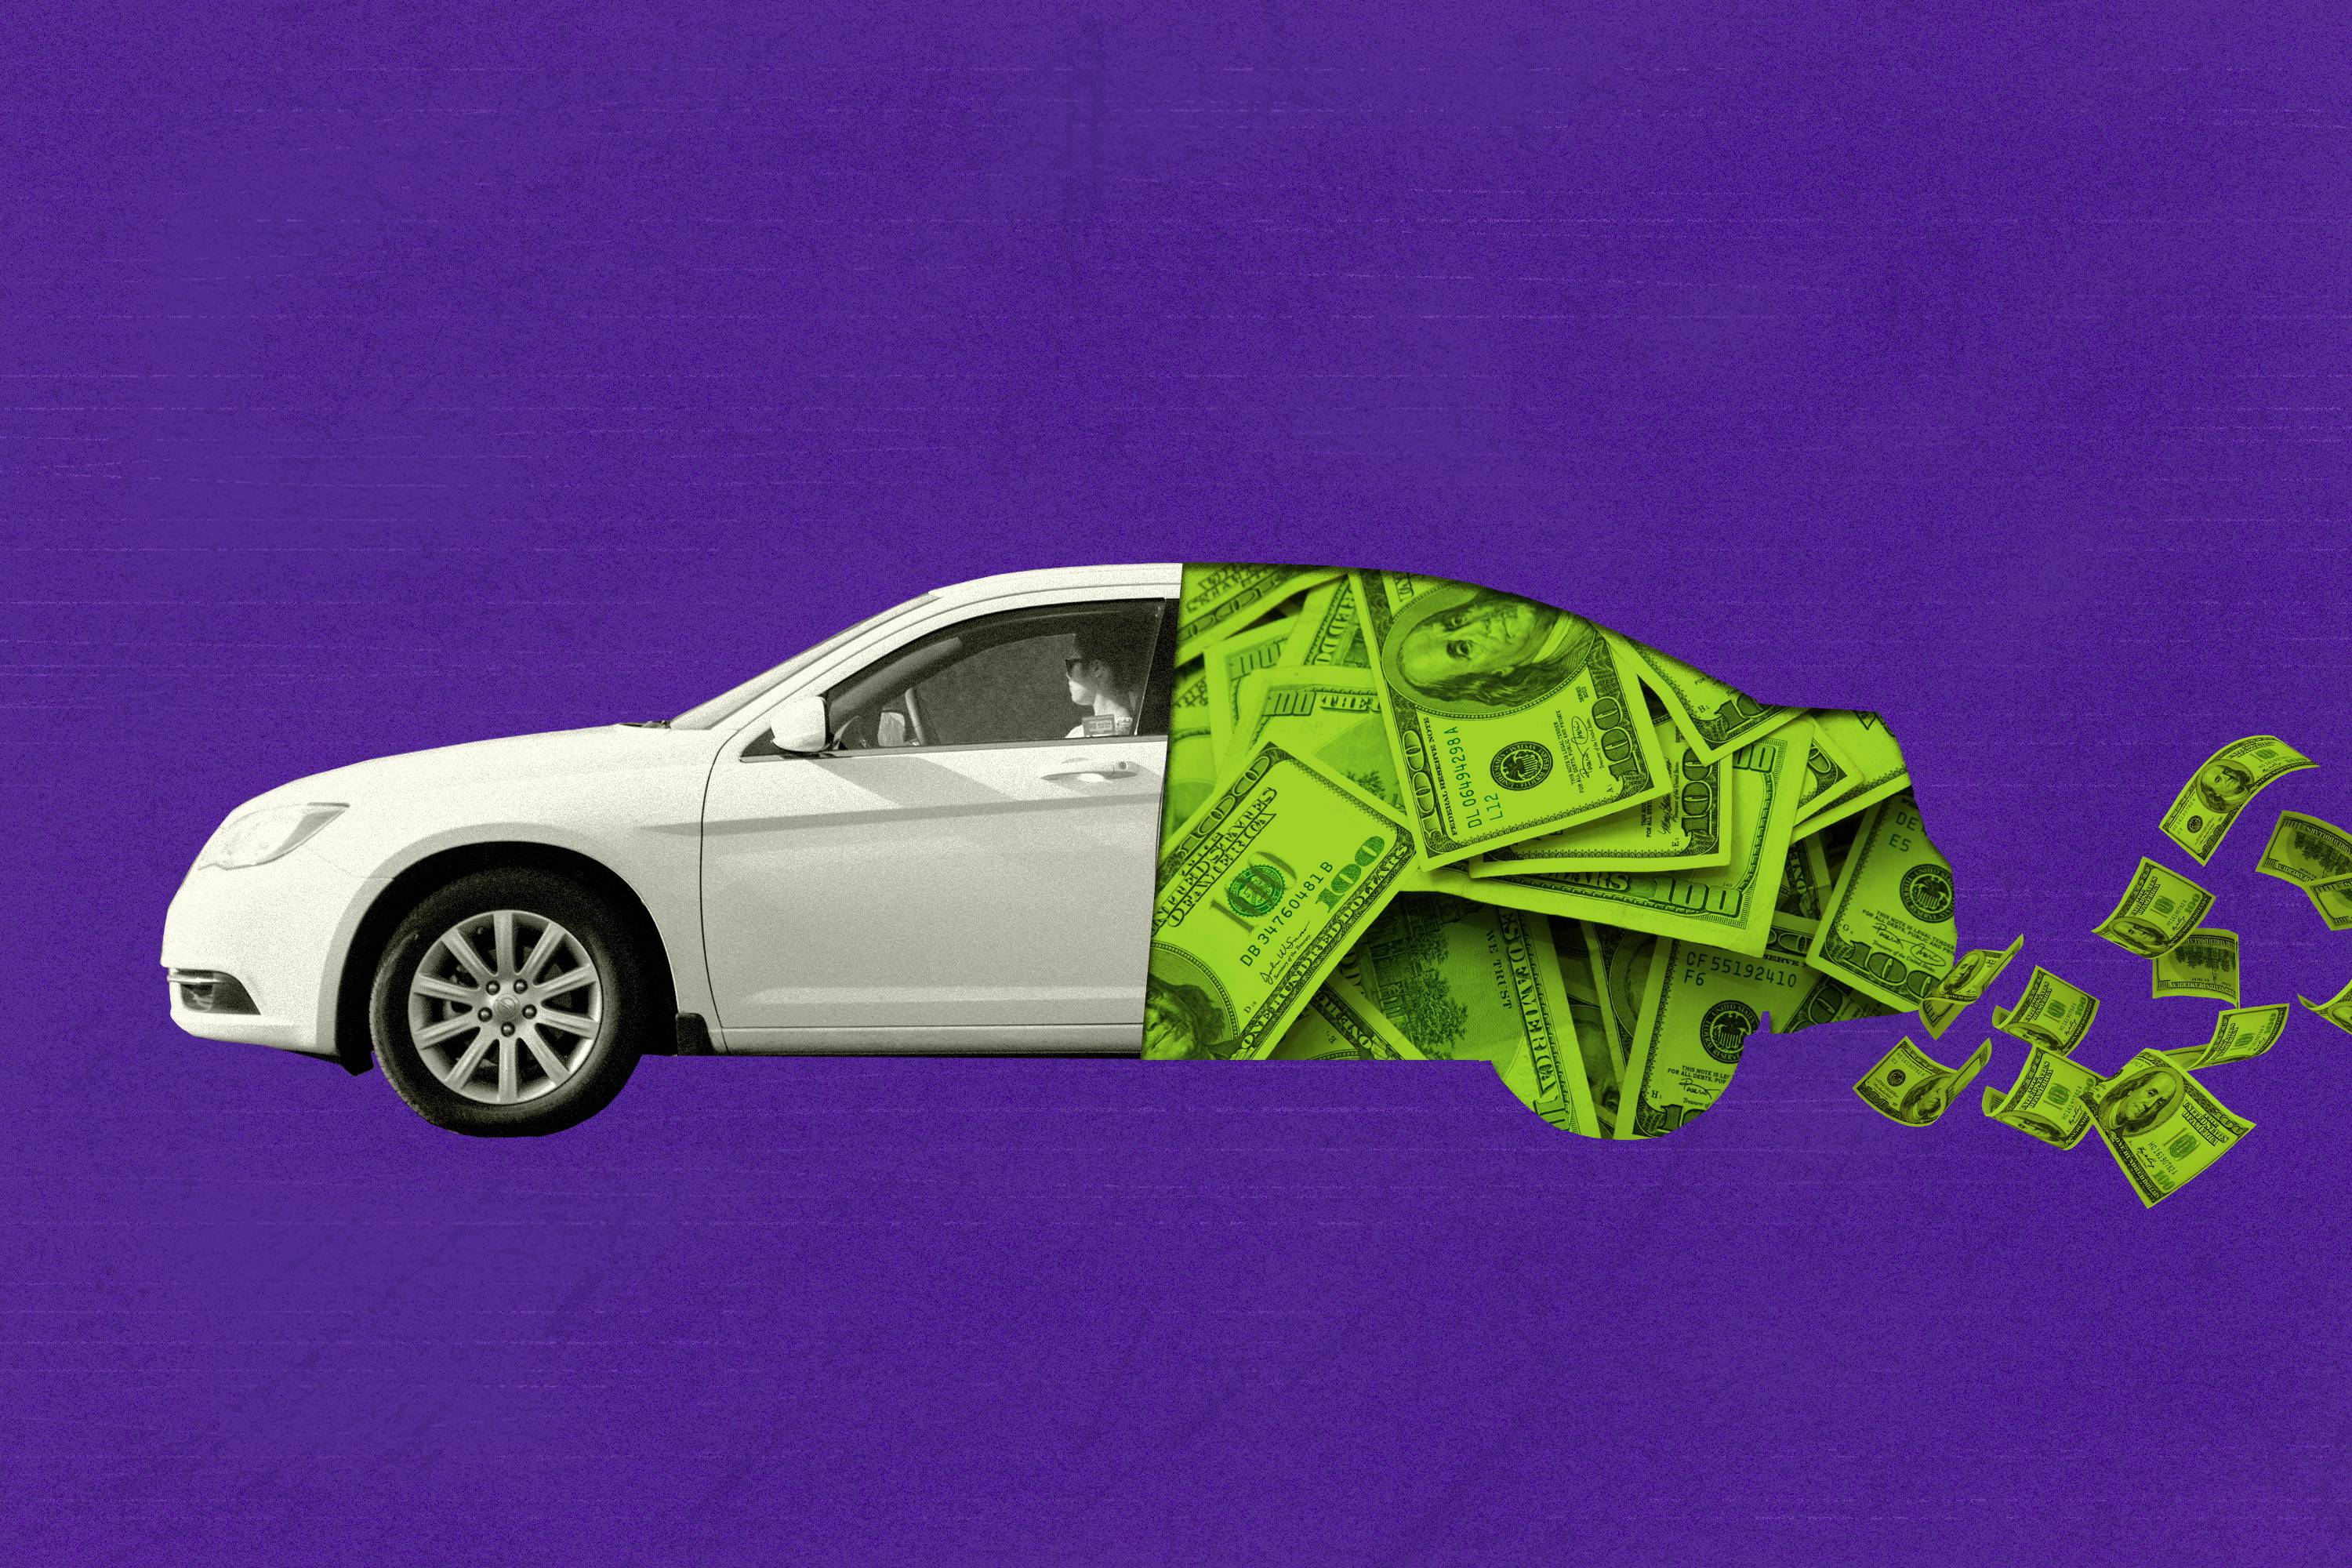 Photo illustration of white sedan driving toward the left of the image against a dark purple background. The rear of the car is cut out, and a pile of one hundred dollar bills fills the back silhouette of the car. One hundred dollar bills fly away from the rear of the car.